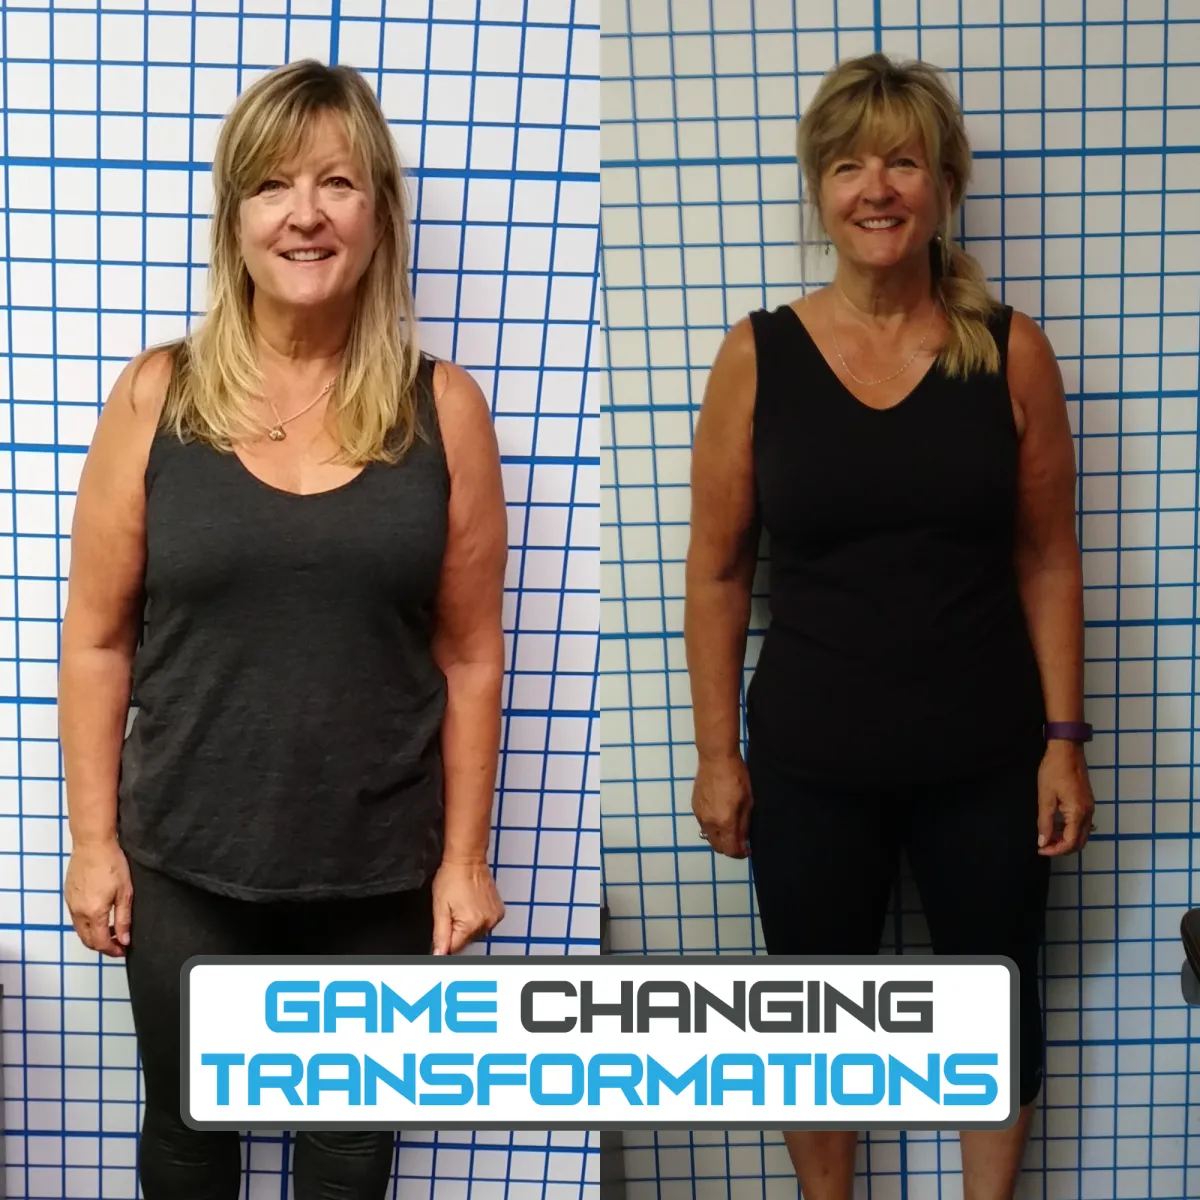 Another amazing weight loss transformation in Libertyville IL